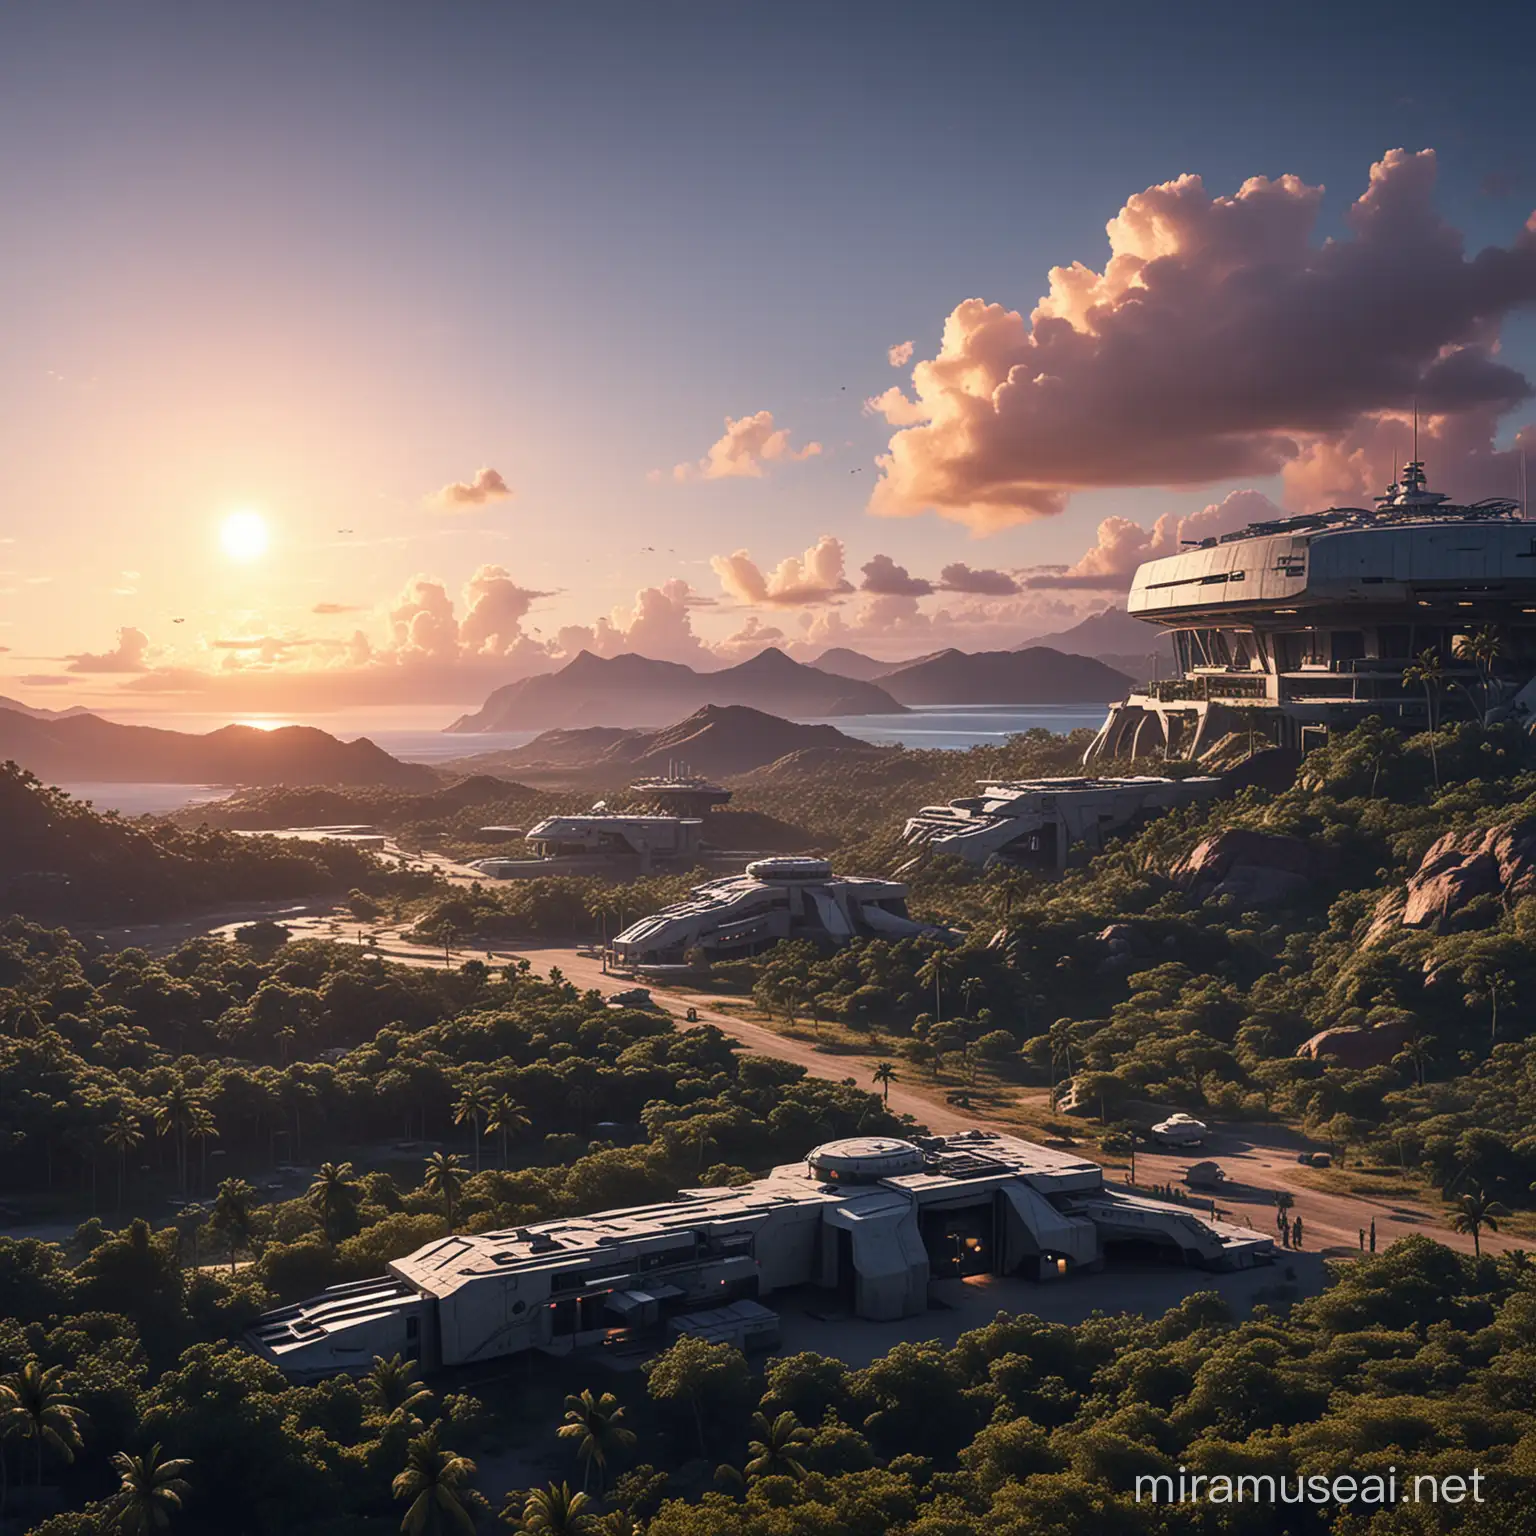 futuristic military base in a remote tropical location, clear sky, dusk, HD. flat lansdscape.